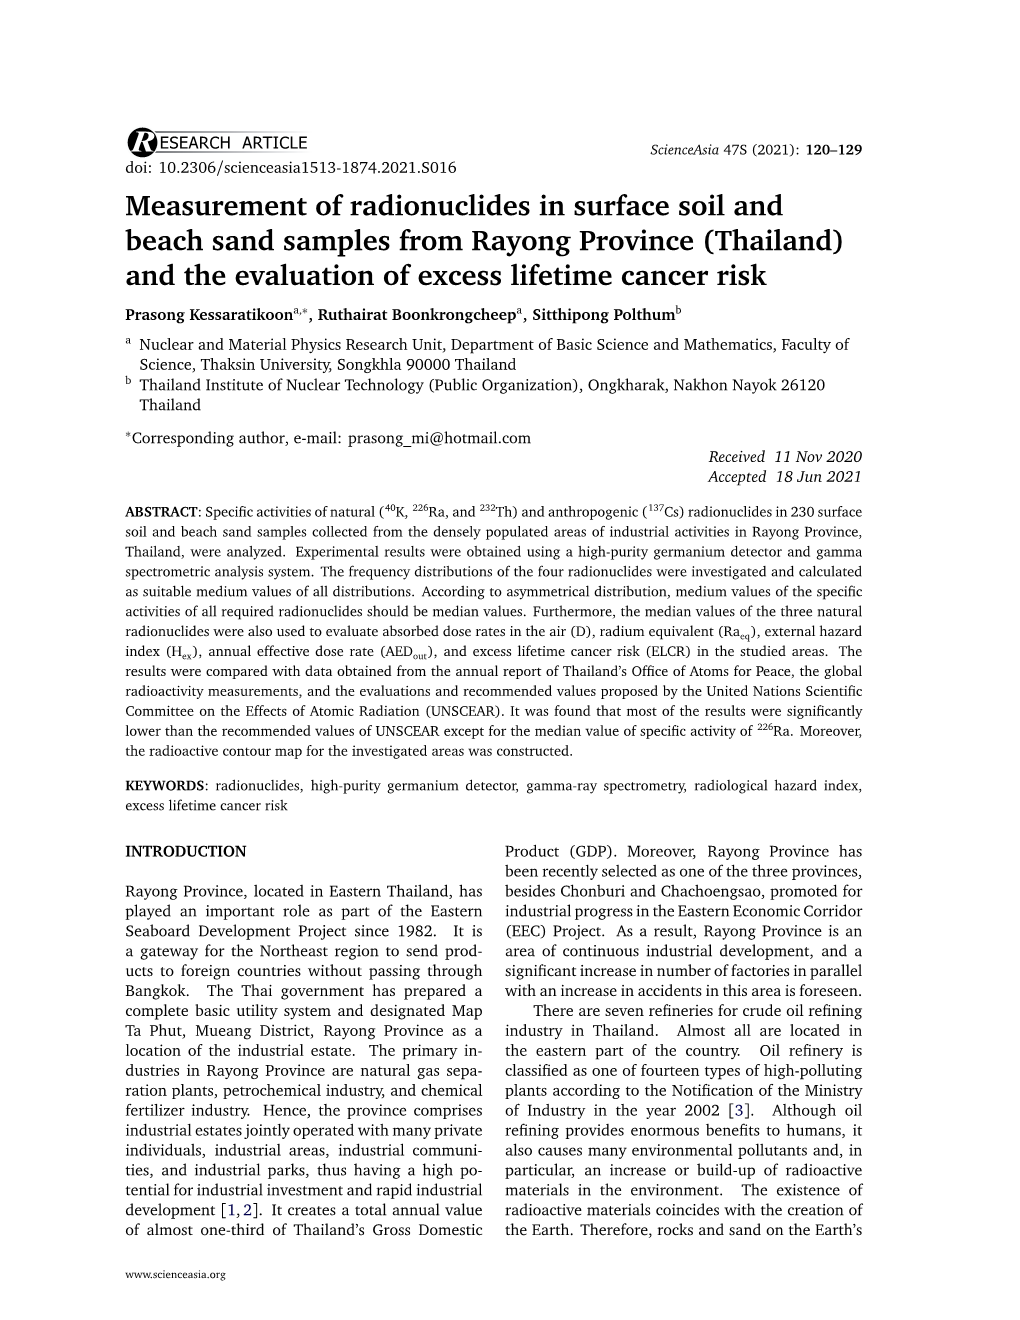 Measurement of Radionuclides in Surface Soil and Beach Sand Samples from Rayong Province (Thailand) and the Evaluation of Excess Lifetime Cancer Risk